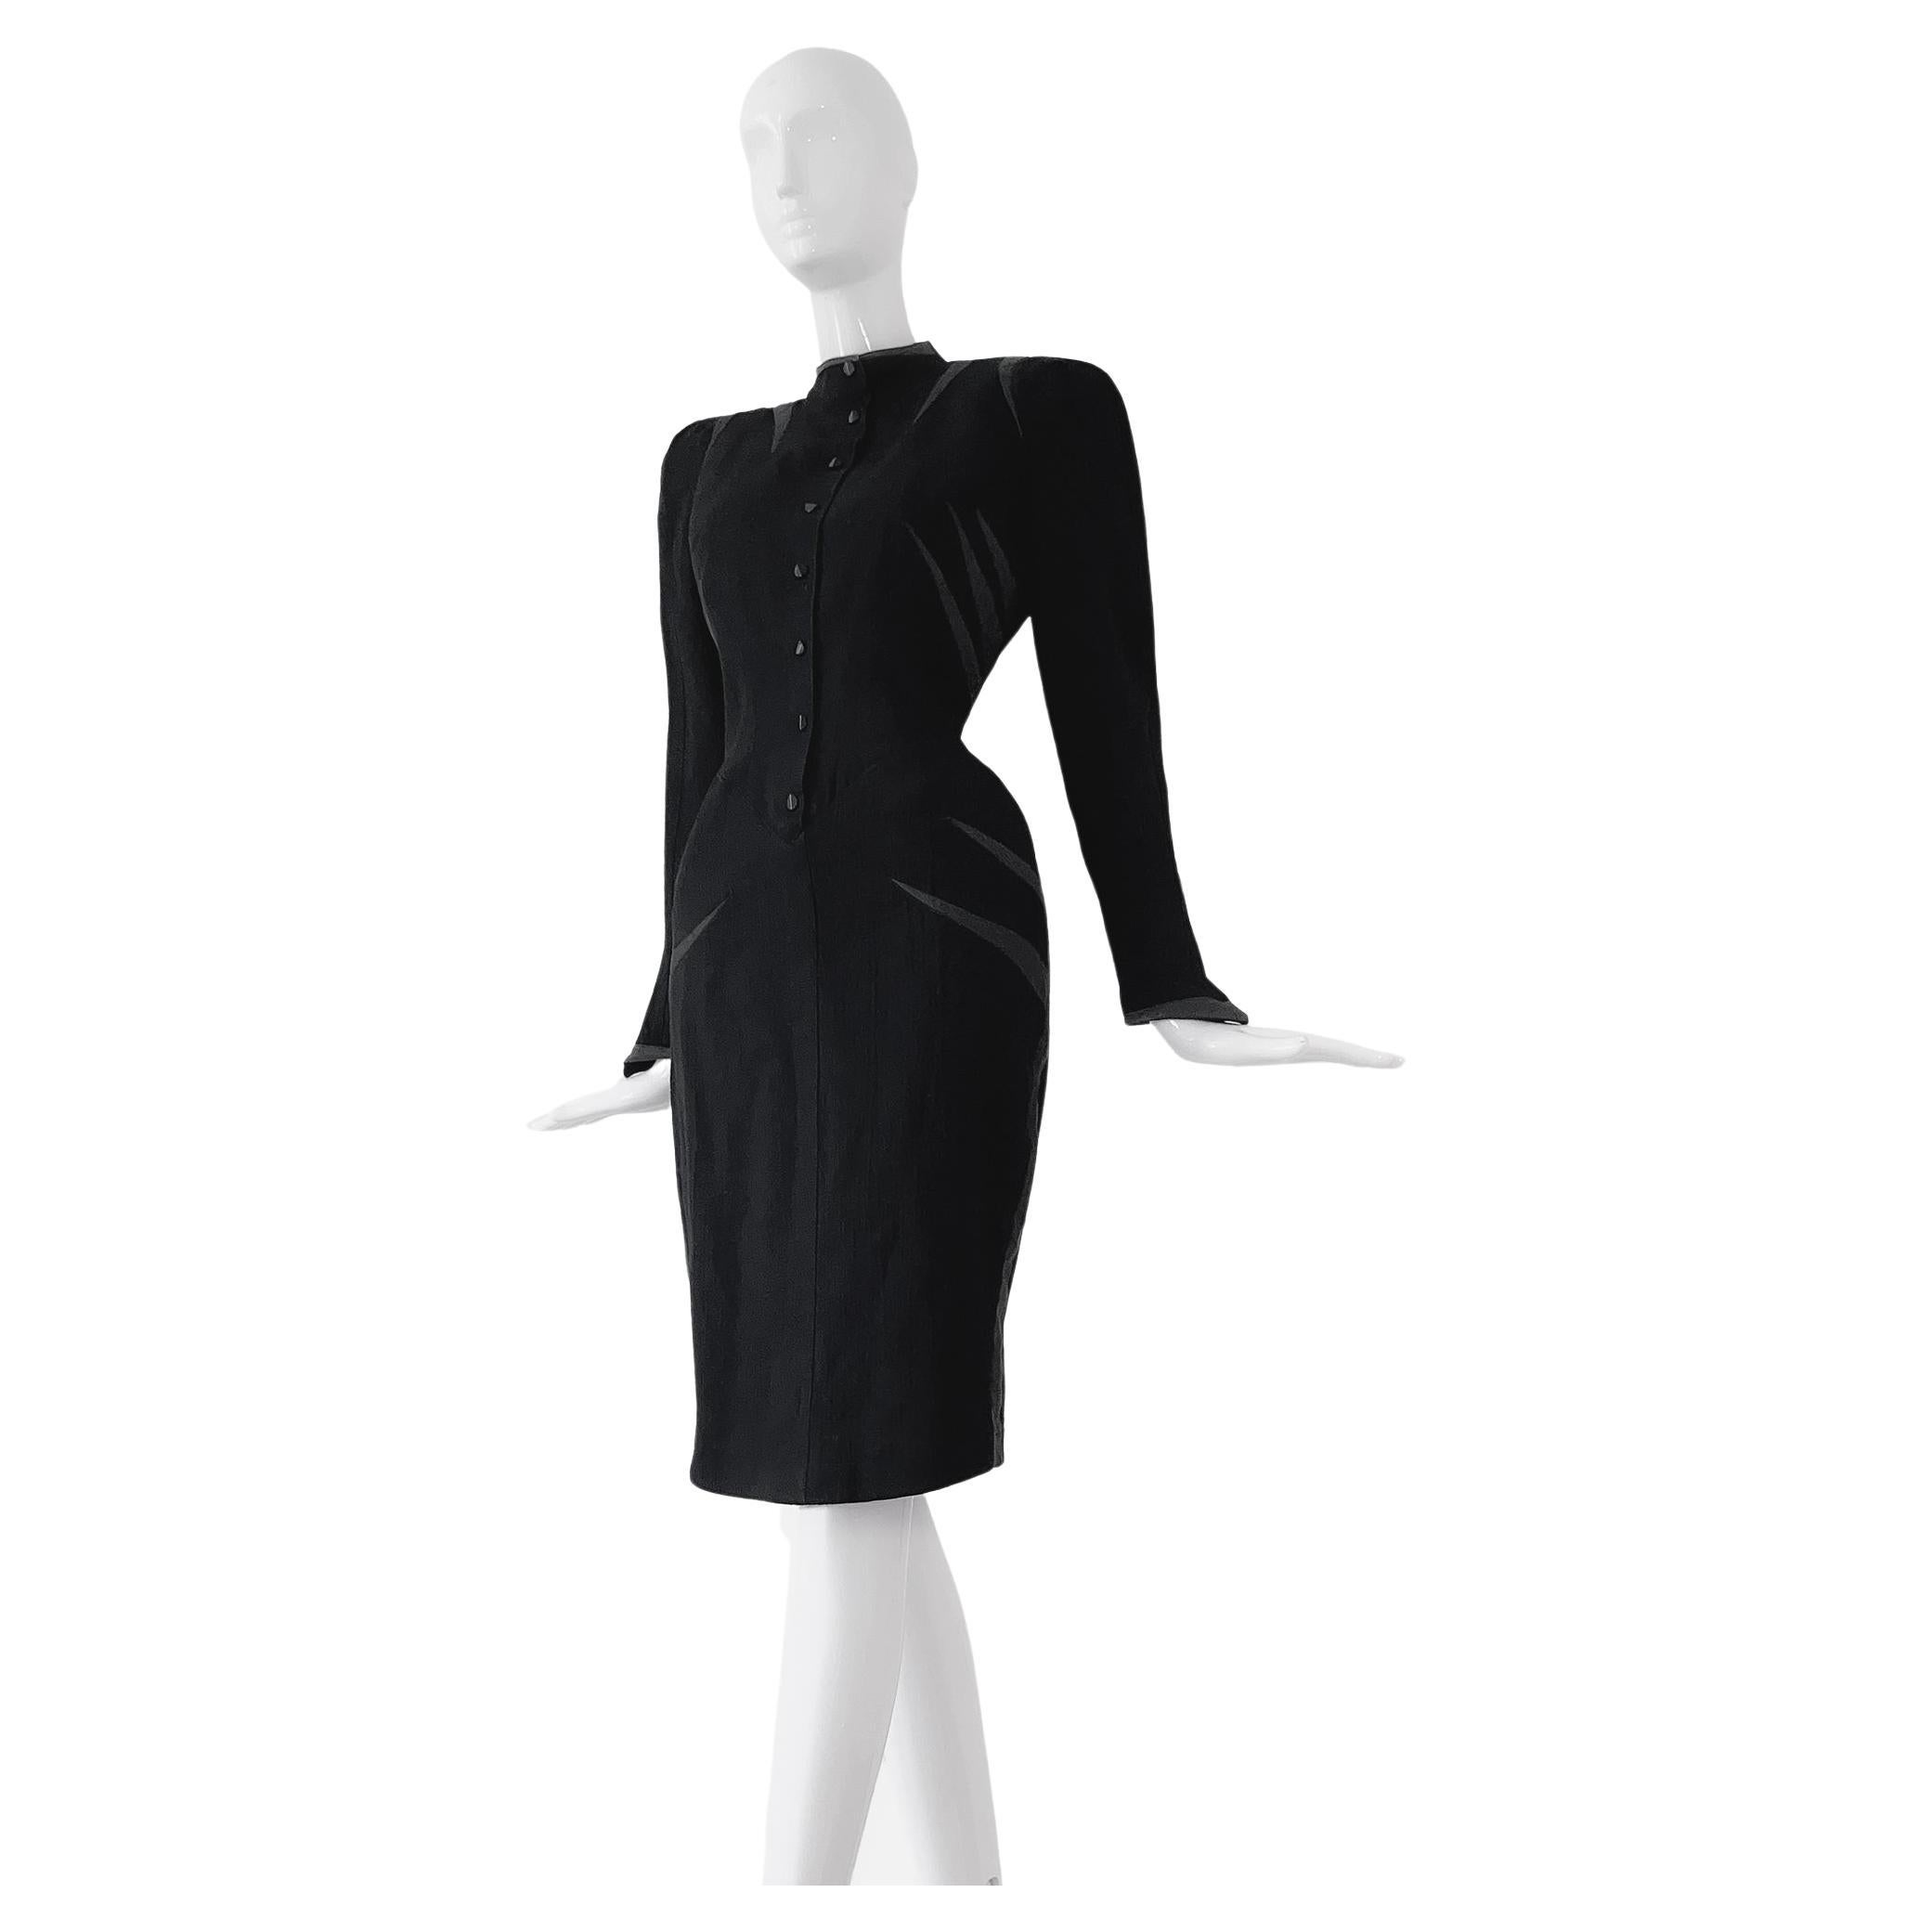 Rare Thierry Mugler SS 1988 Dress Black Iconic Dramatic Collectors Piece  For Sale